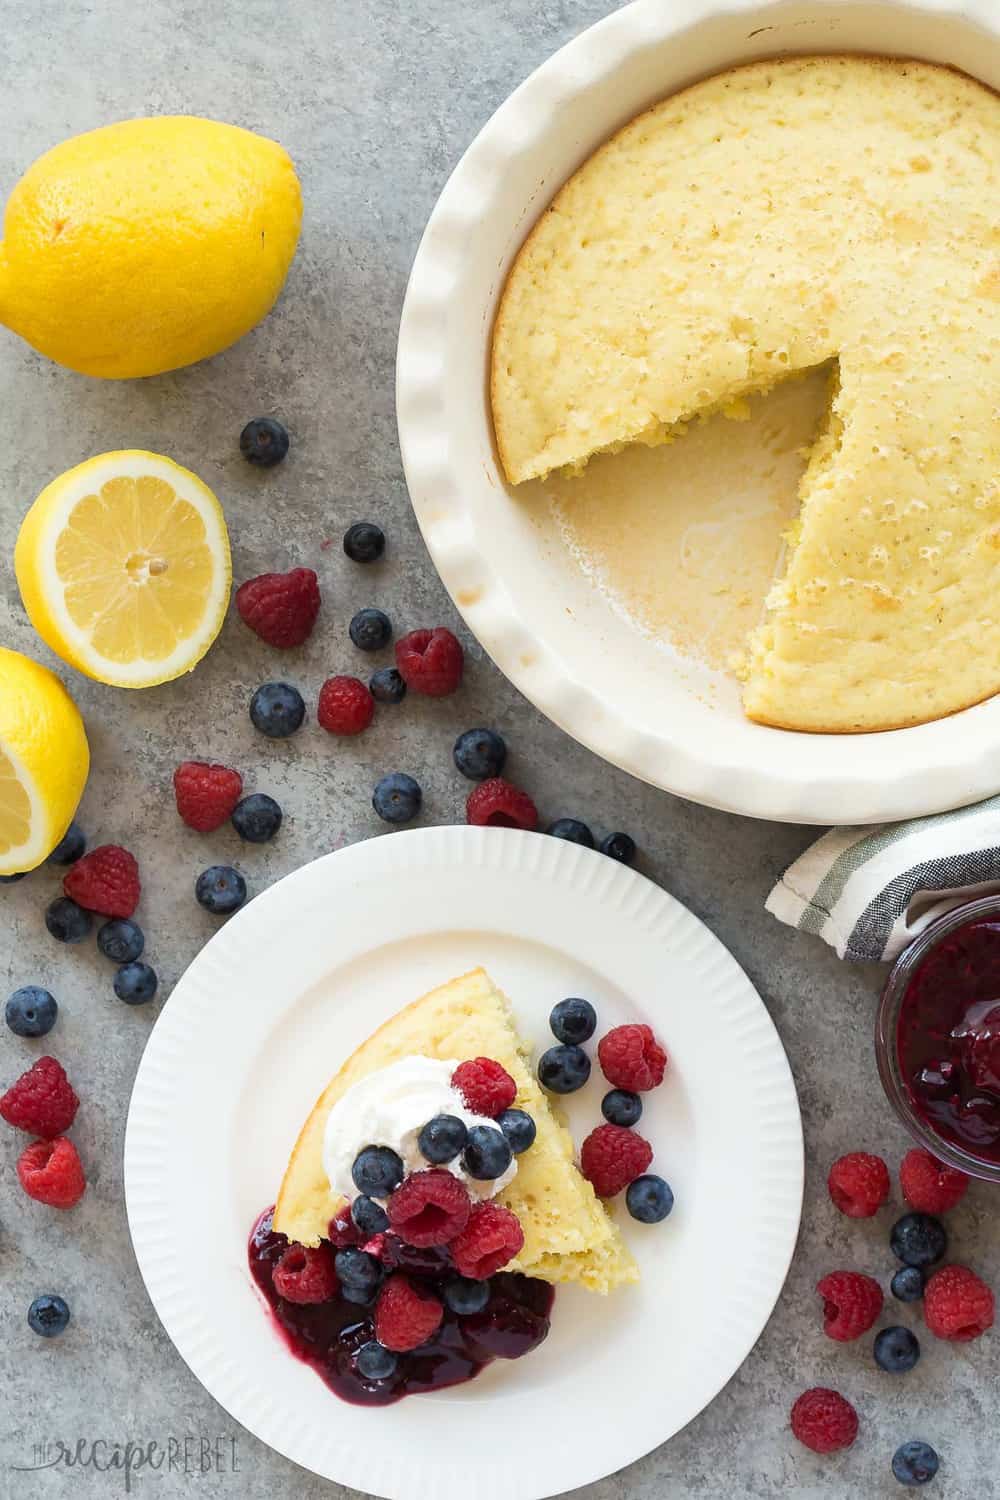 This Lemon Baked Pancake with Berry Sauce slice on a white plate.